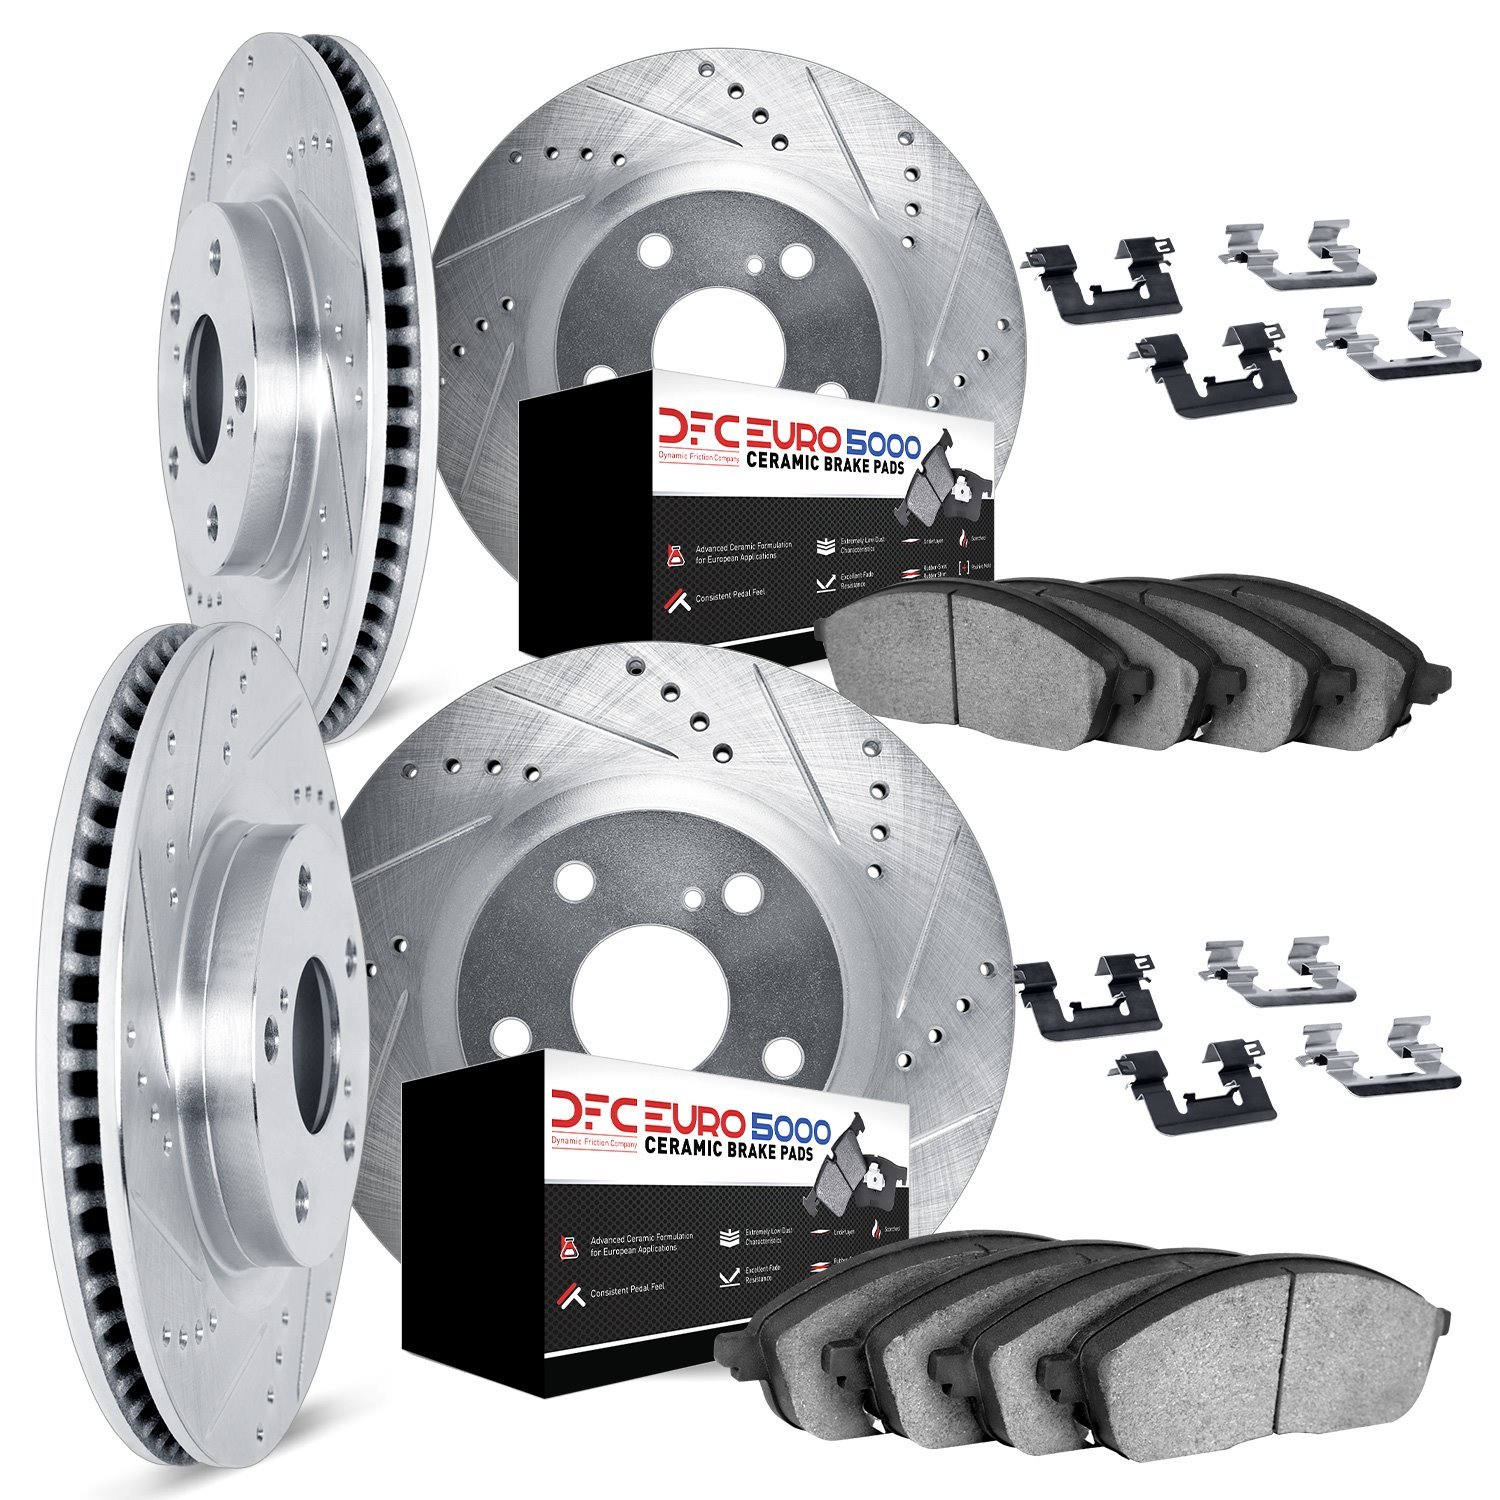 7614-31012 Drilled/Slotted Brake Rotors w/5000 Euro Ceramic Brake Pads Kit & Hardware [Silver], 1991-1993 BMW, Position: Front a